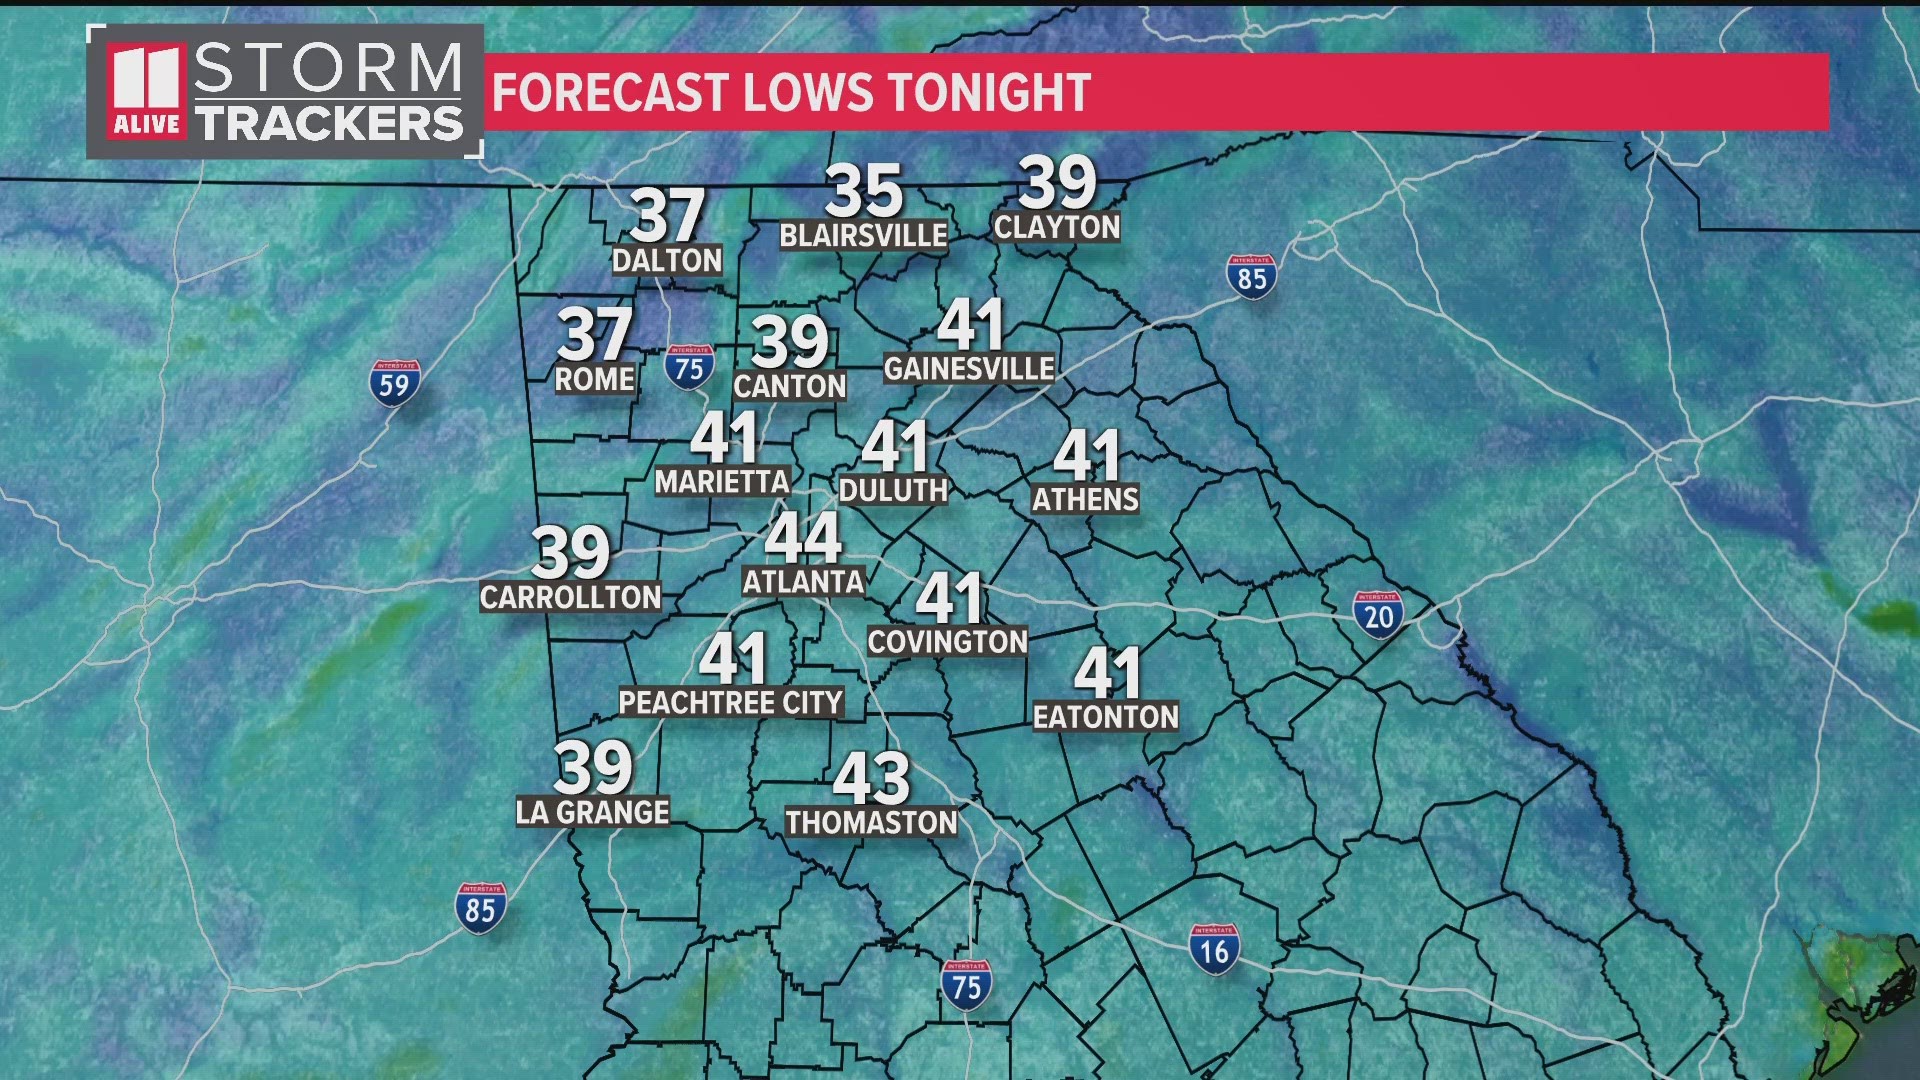 Chilly temperatures settle in overnight